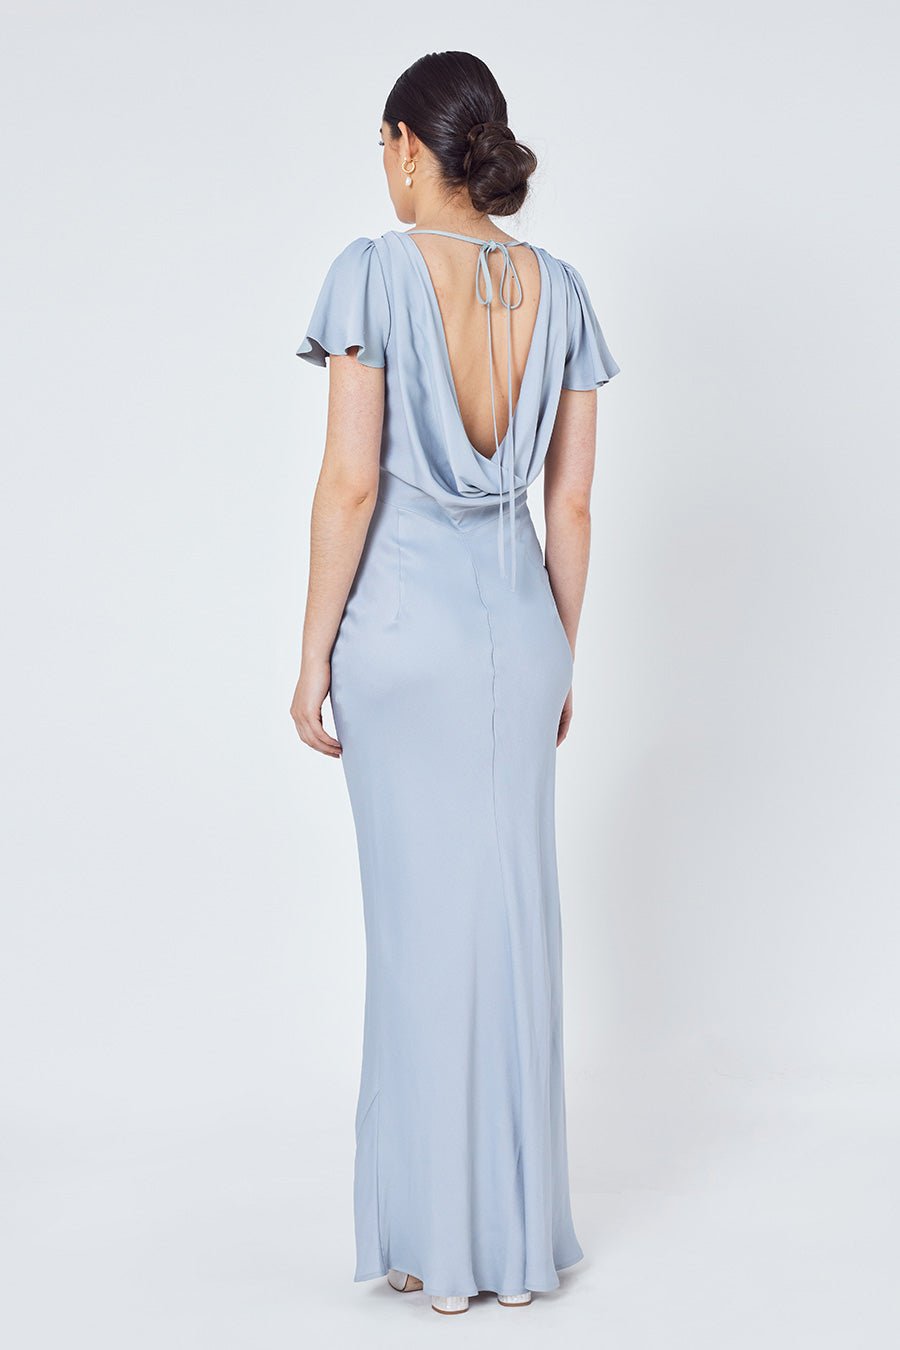 Eadie Satin Cowl Back Dress - Duck Egg Blue - Maids to Measure